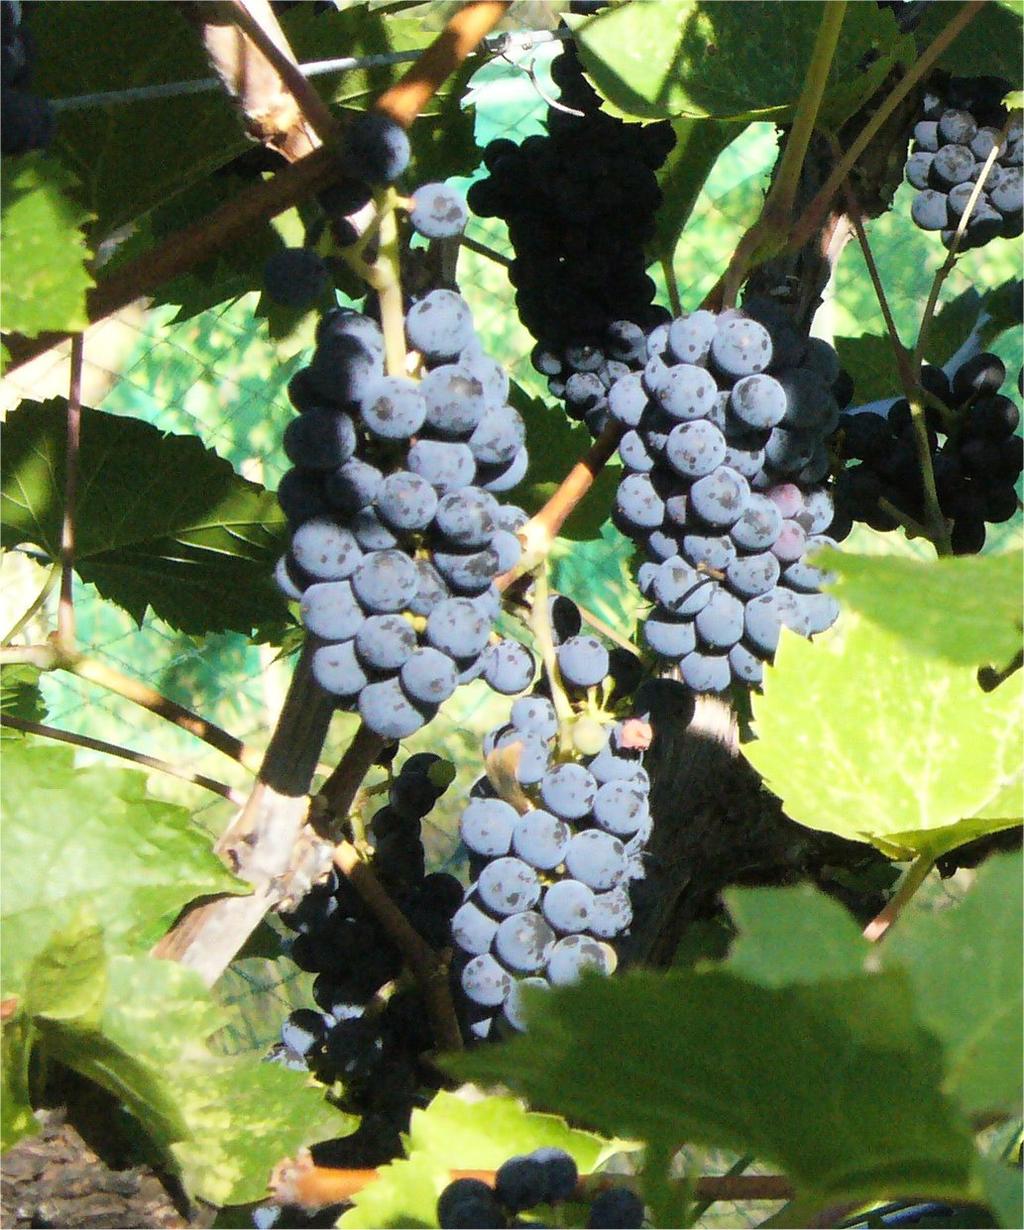 It ripens late but the tannins are available even when not at full sweetness. In this increasingly warm climate, this grape achieves full ripeness in late October.